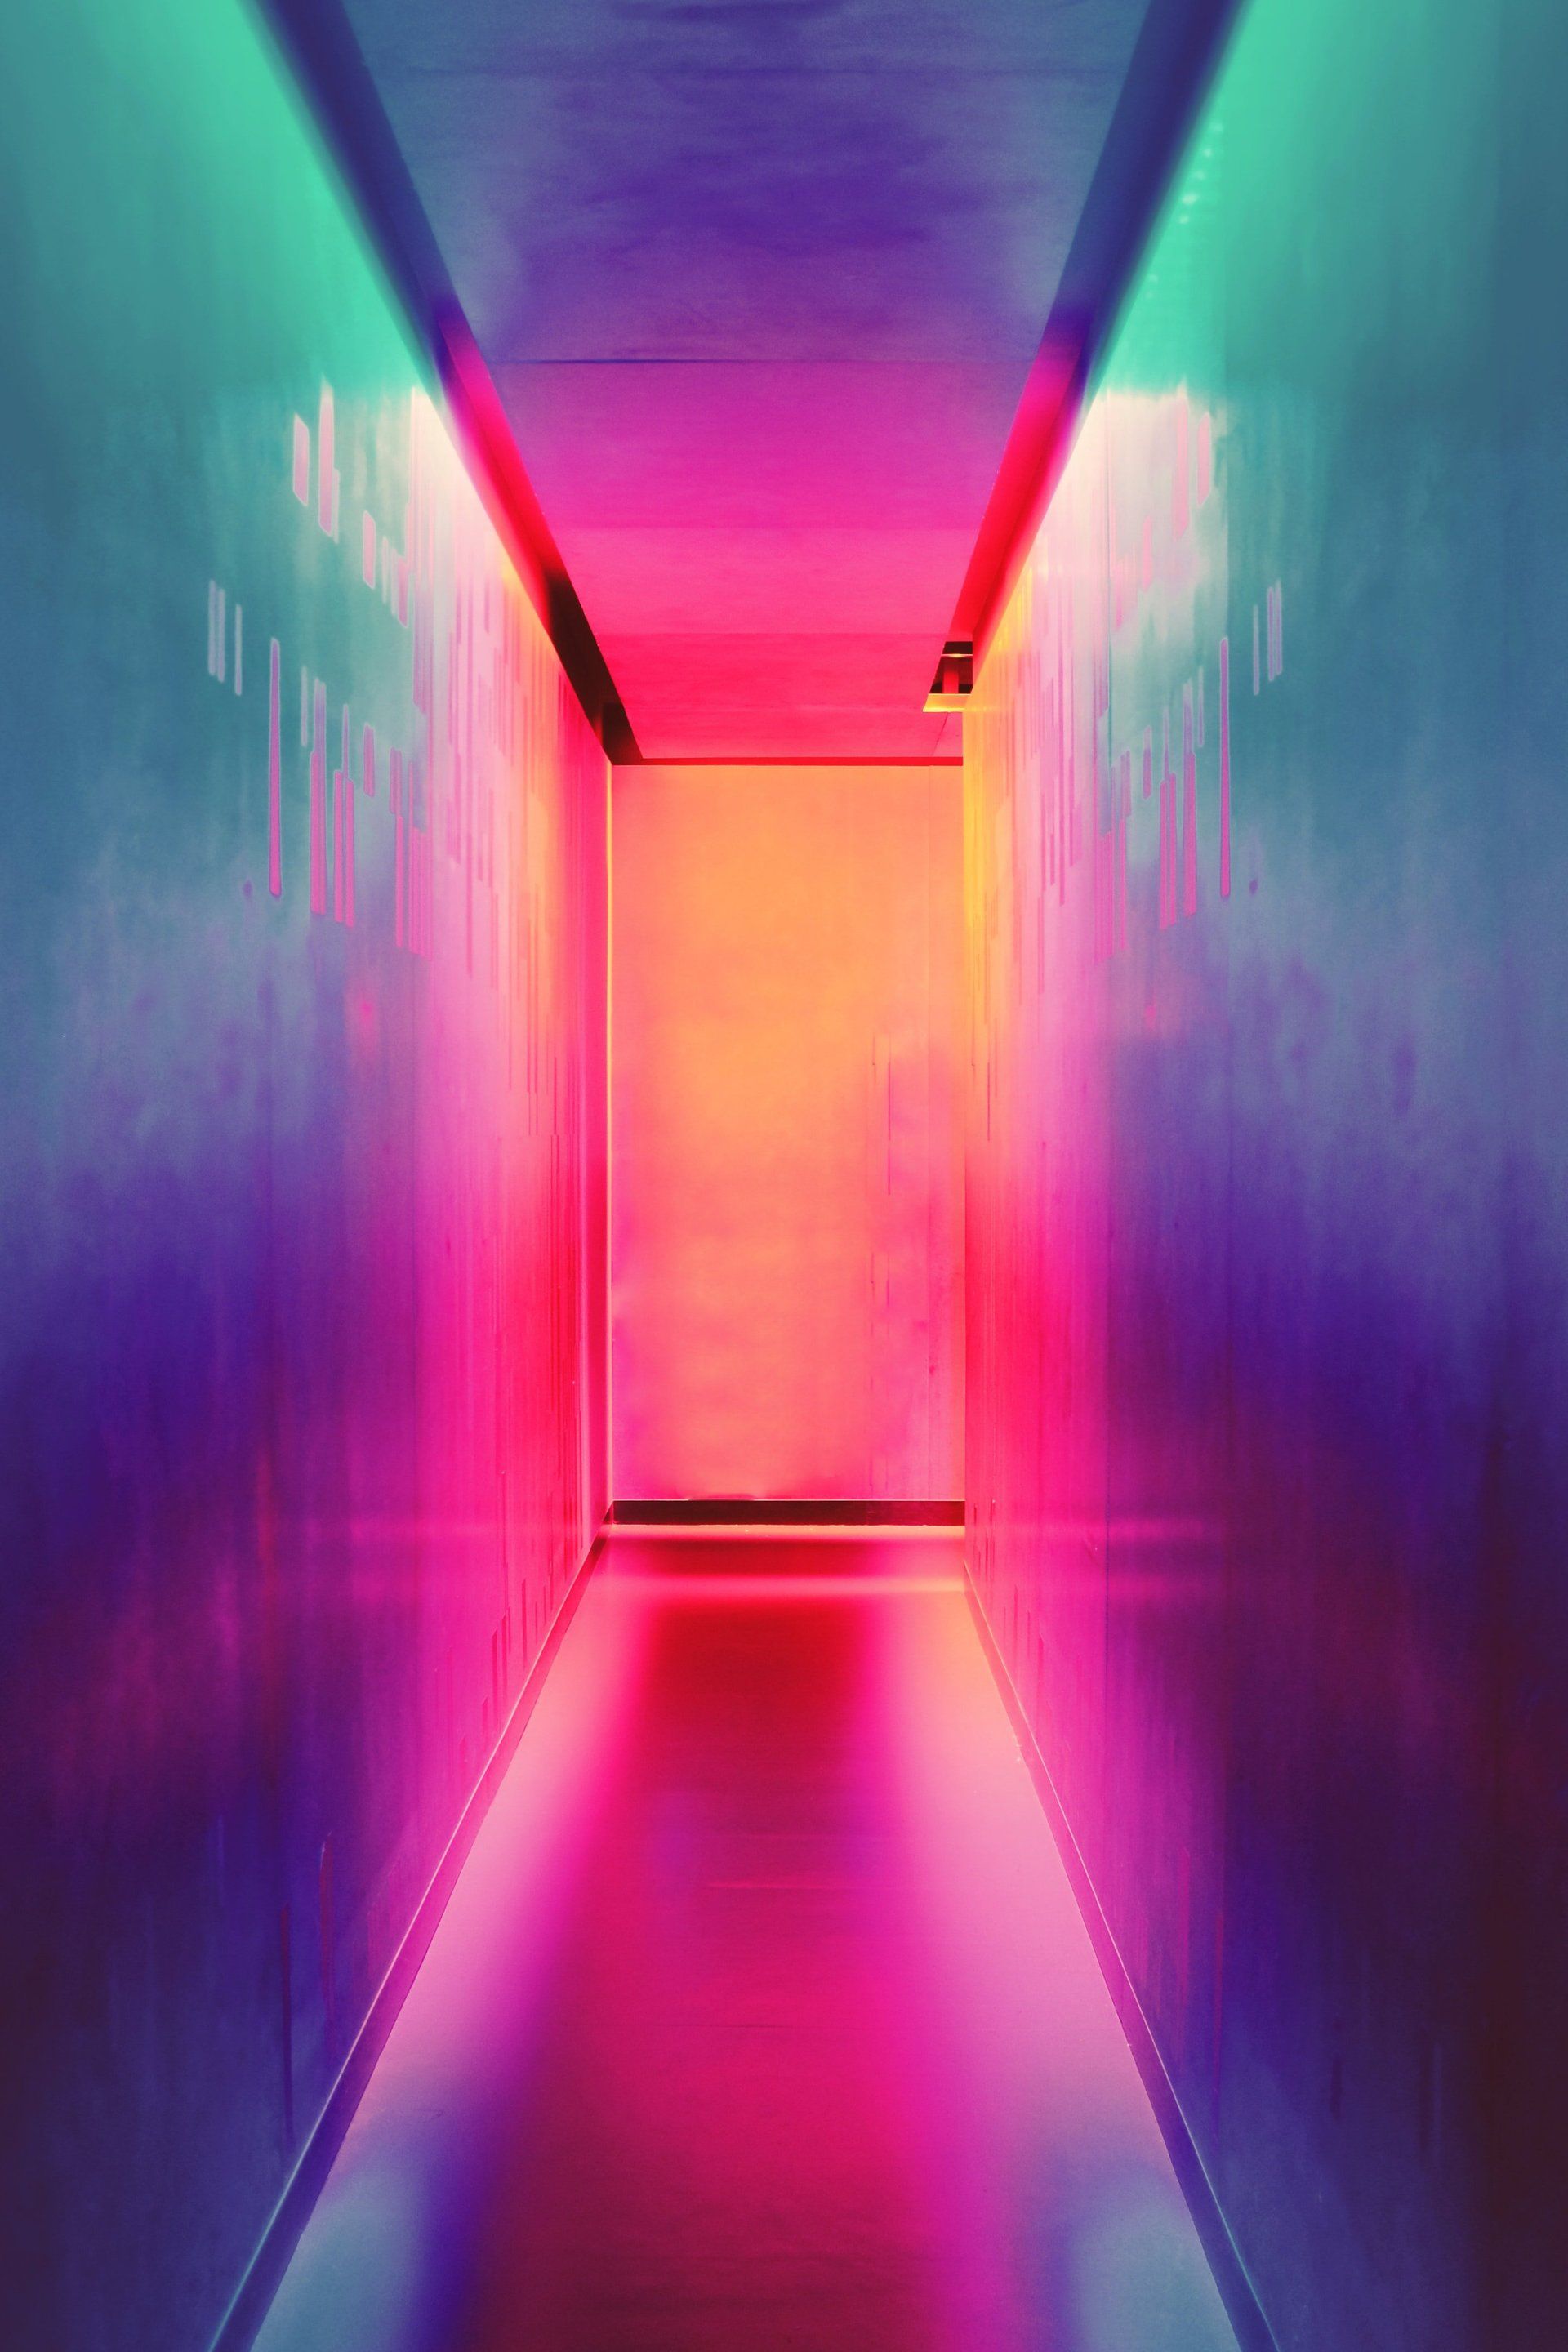 A colorful hallway lit by LED lights